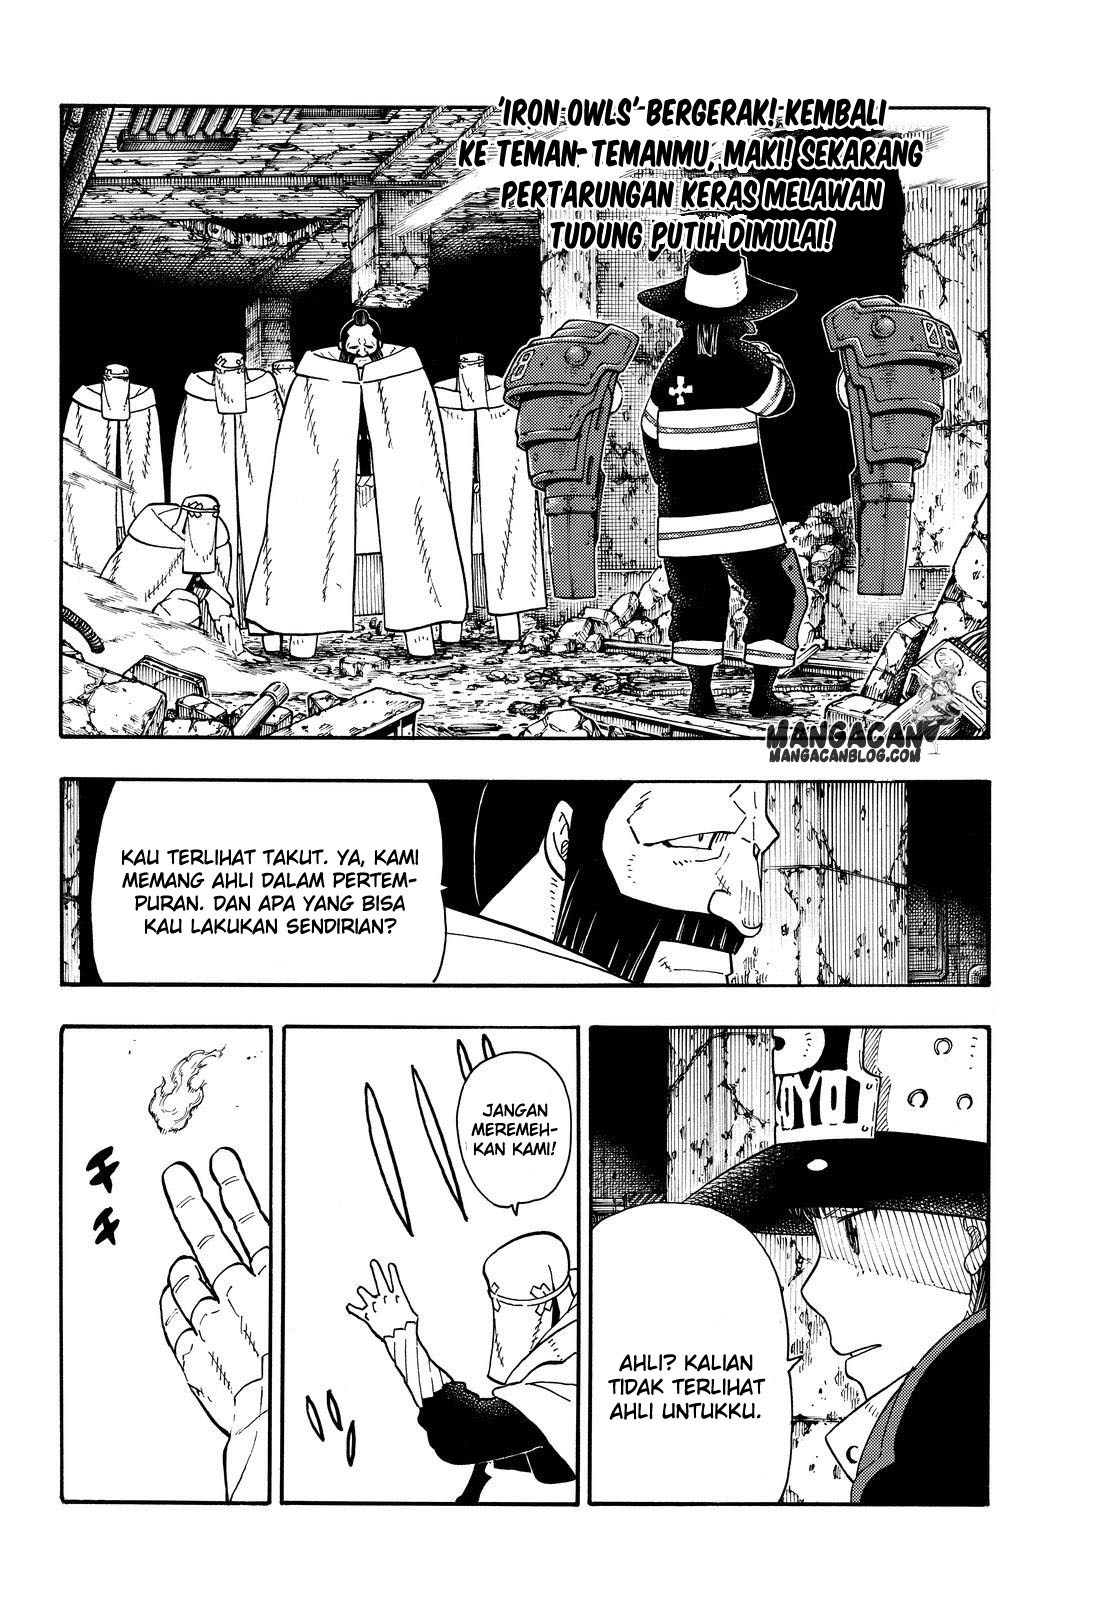 Fire Brigade of Flames Chapter 69